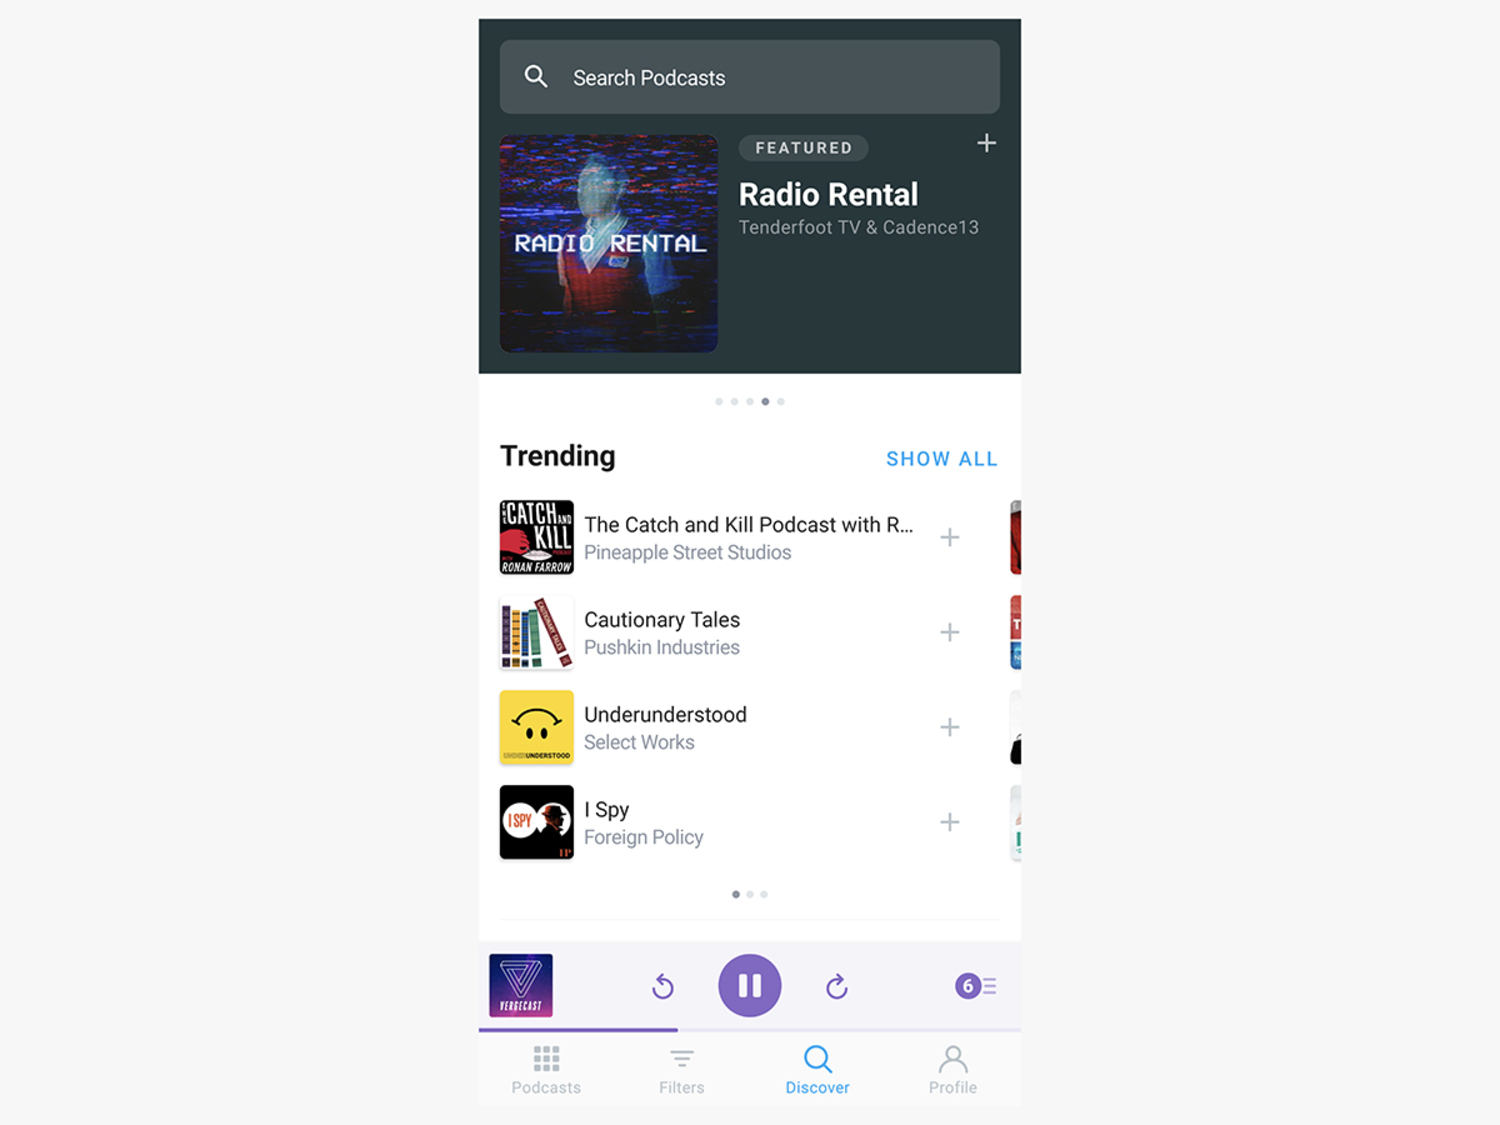 The Pocket Cast app on a phone, showing a list of trending podcasts.